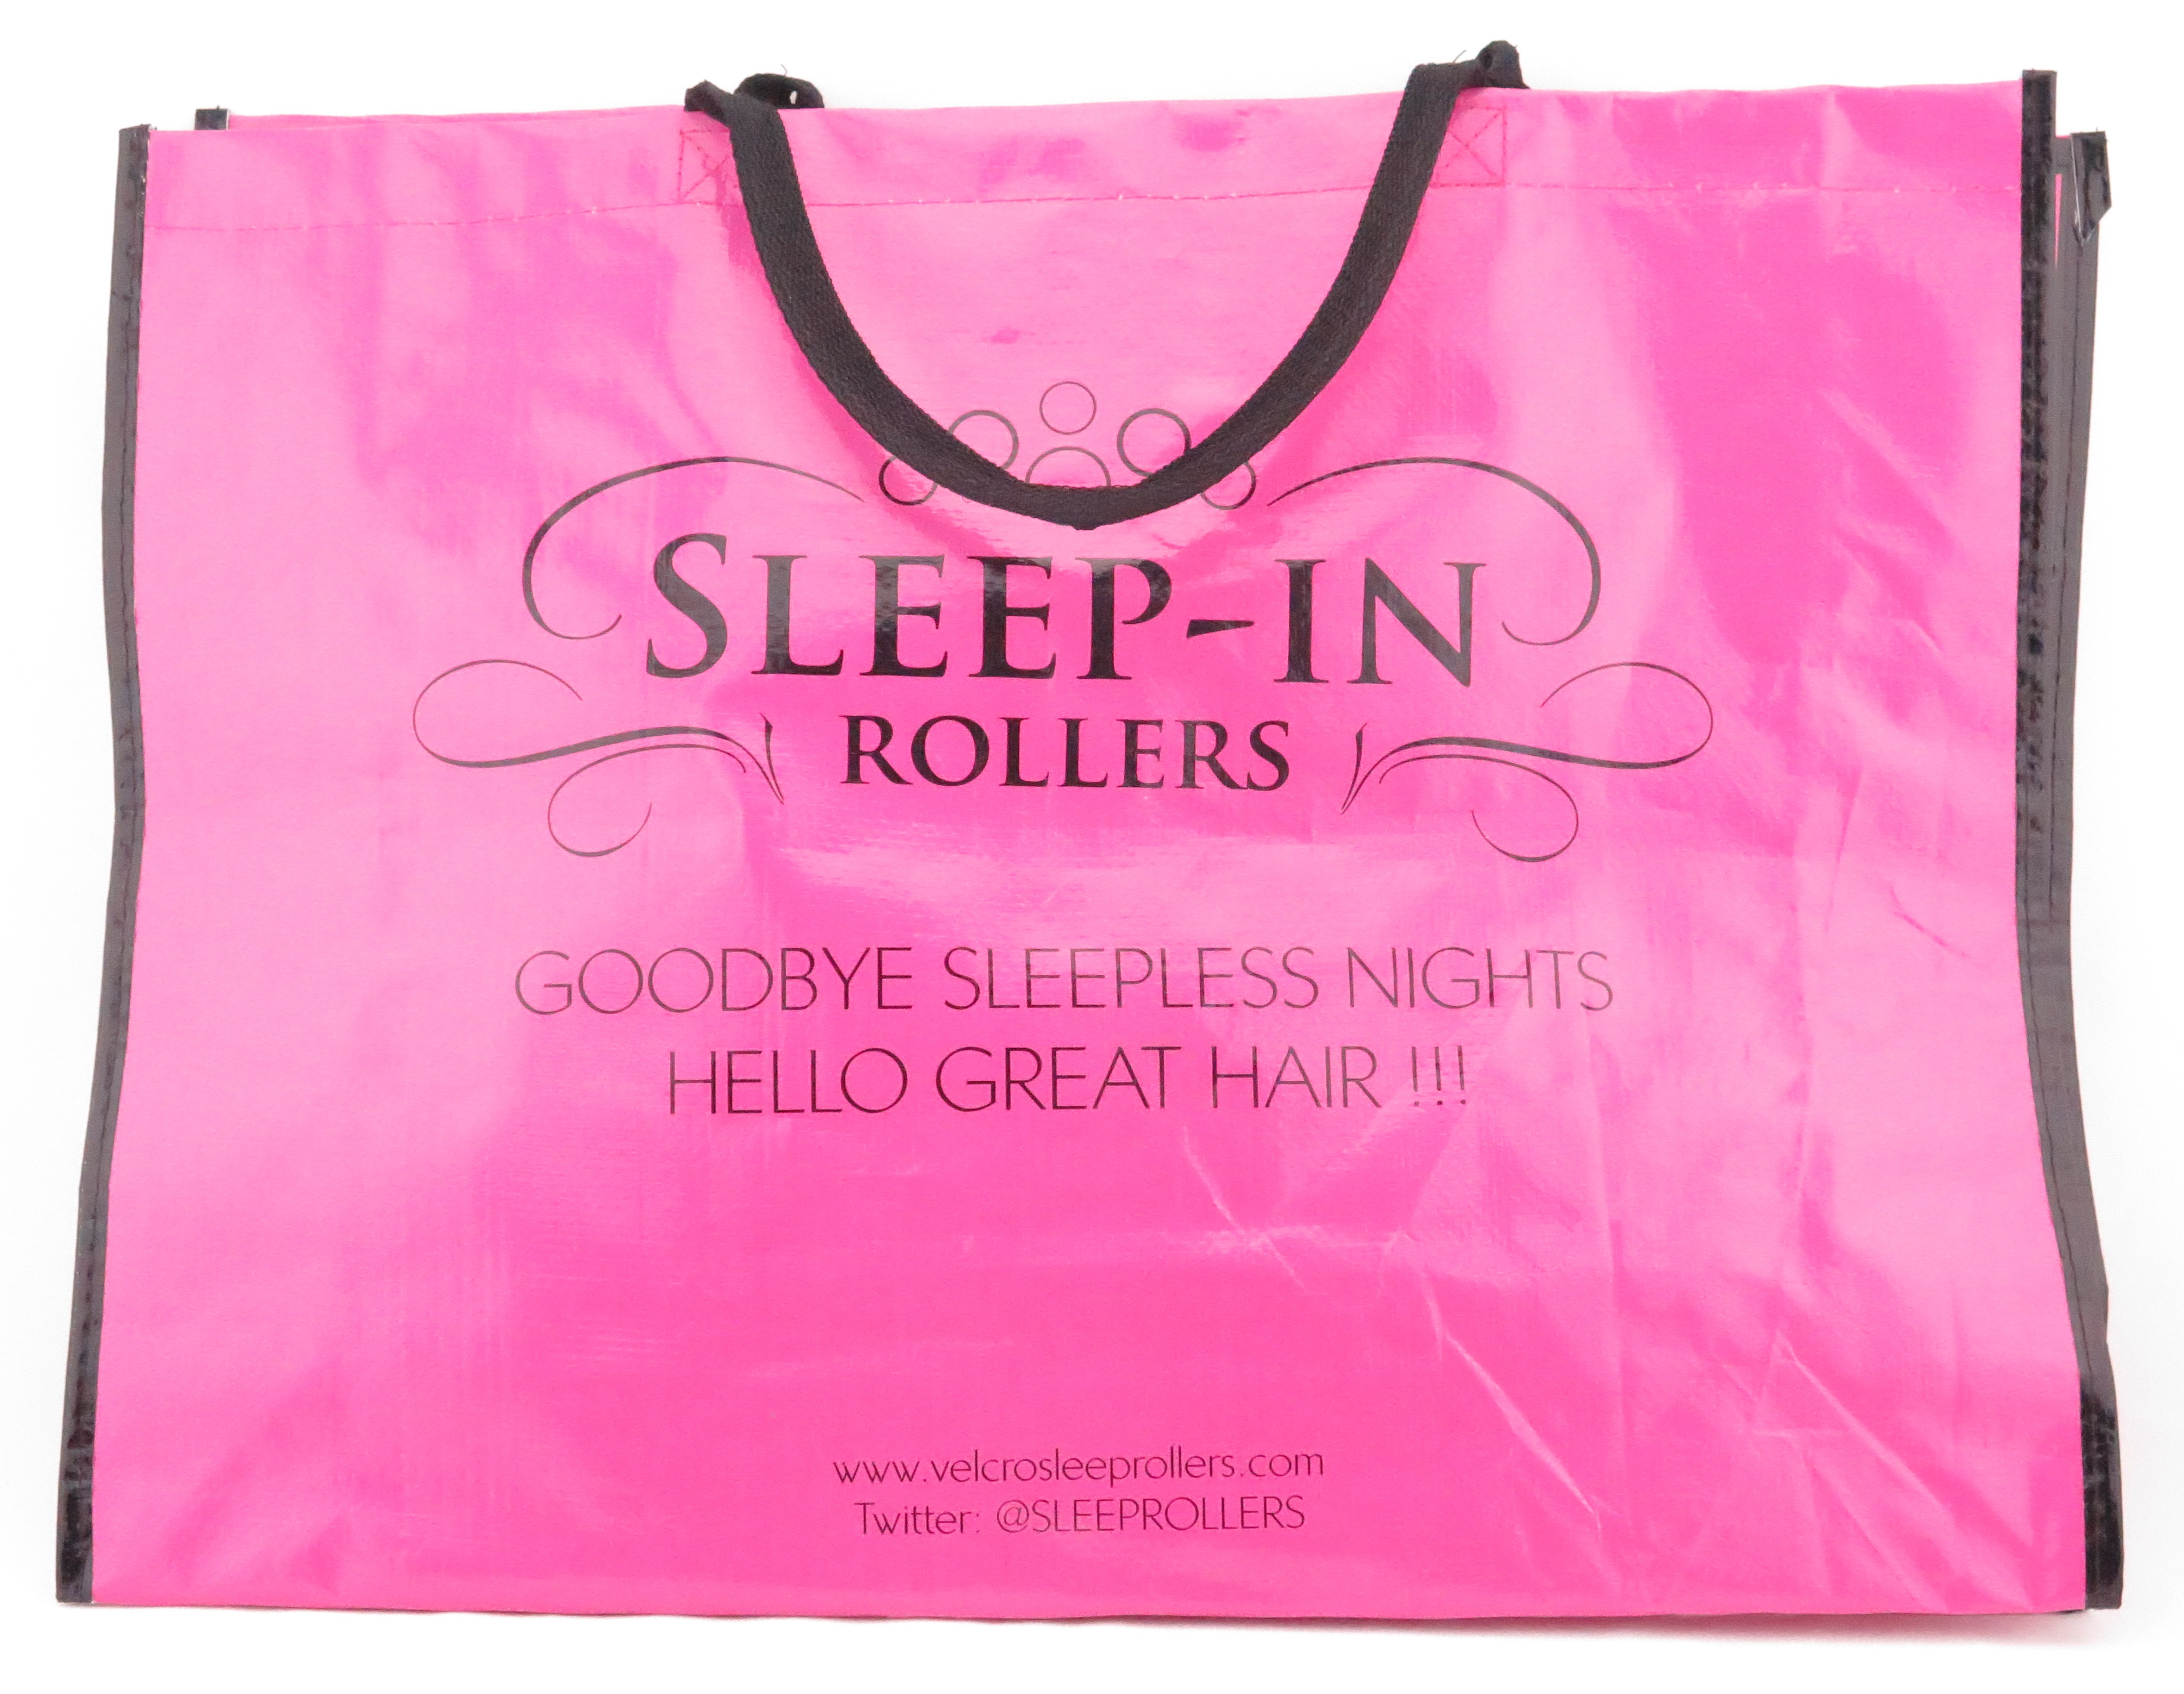 Sleep-In Rollers Durrable Pink Carrier